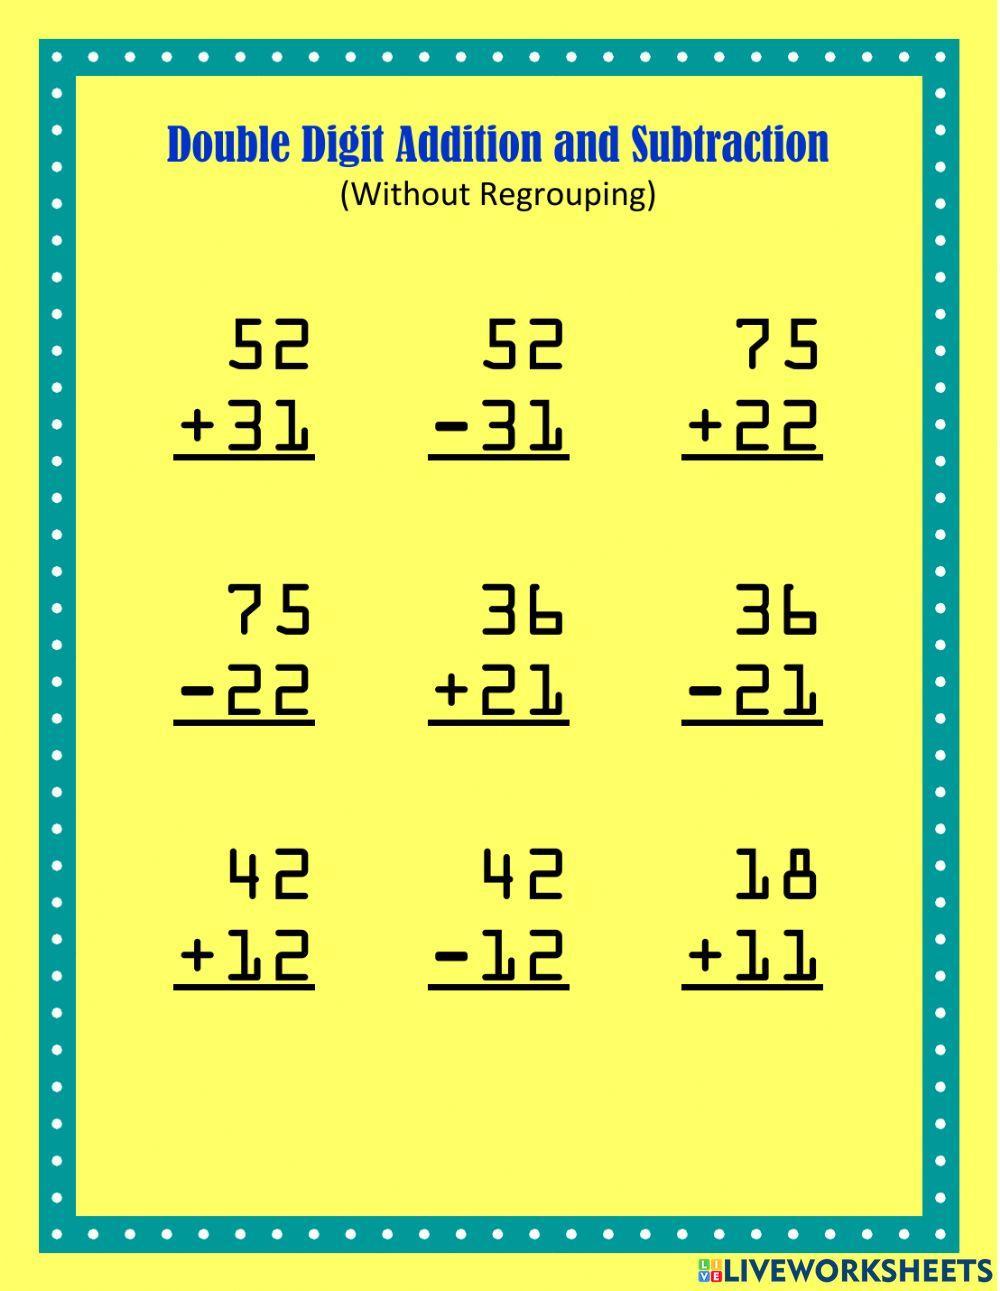 Double Digit Addition and Subtraction Set 5